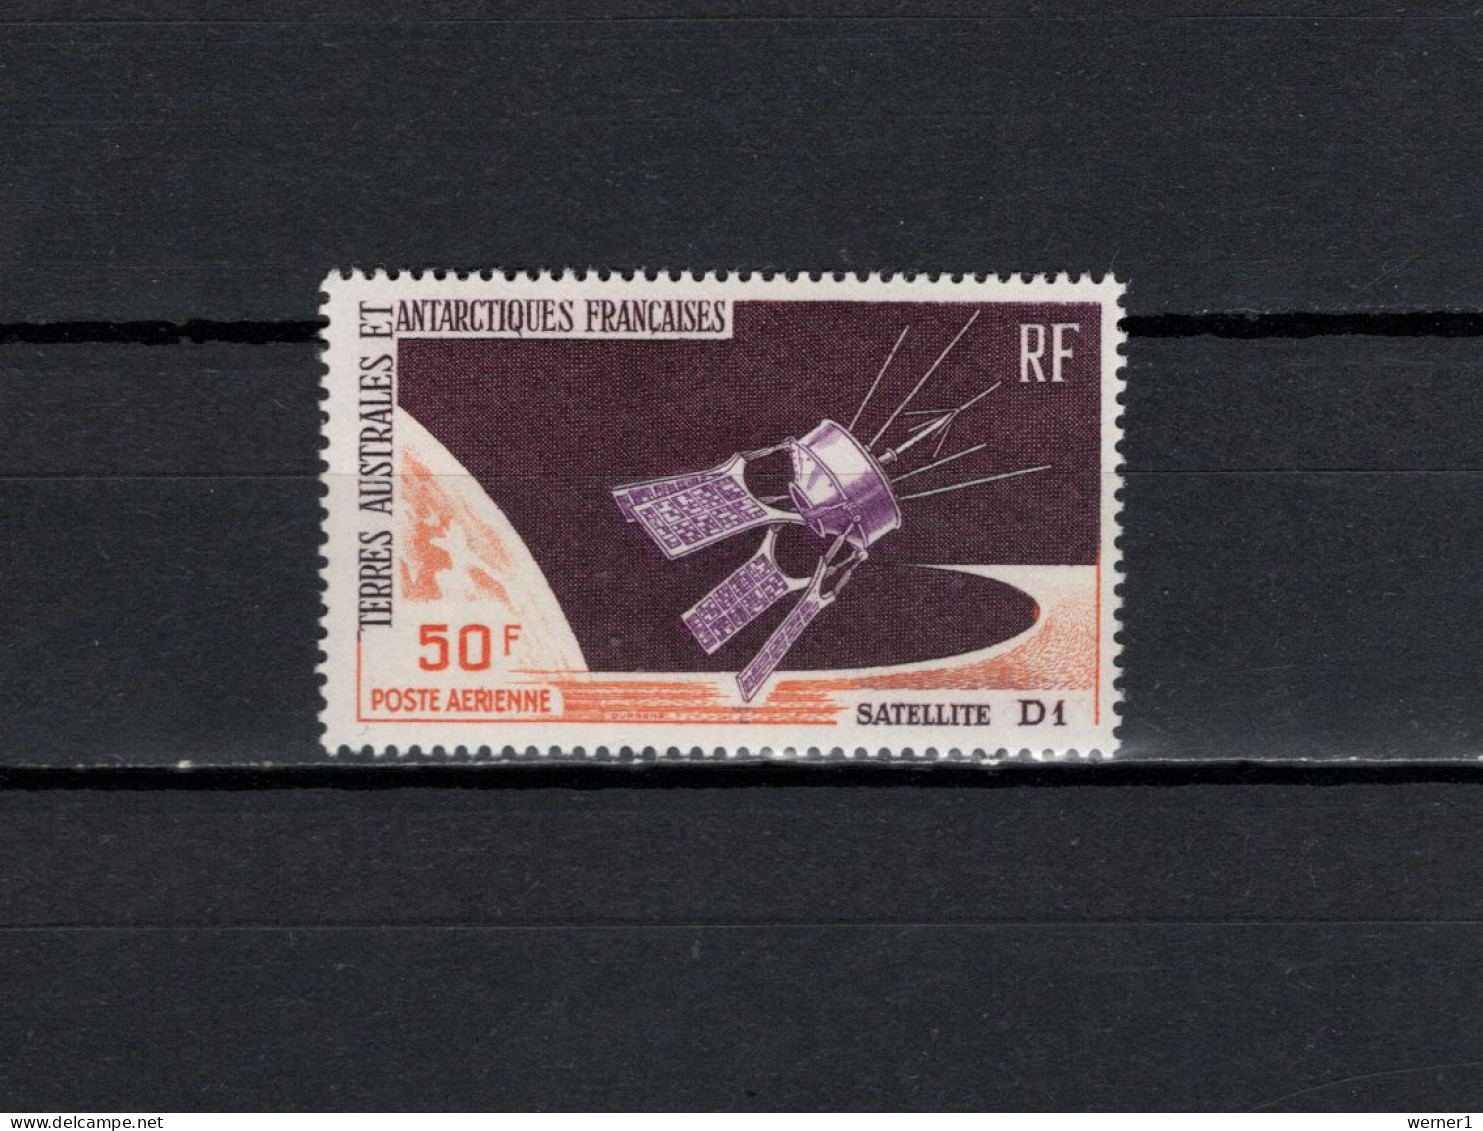 FSAT French Antarctic Territory 1966 Space, D1 Satellite Stamp MNH - Ozeanien